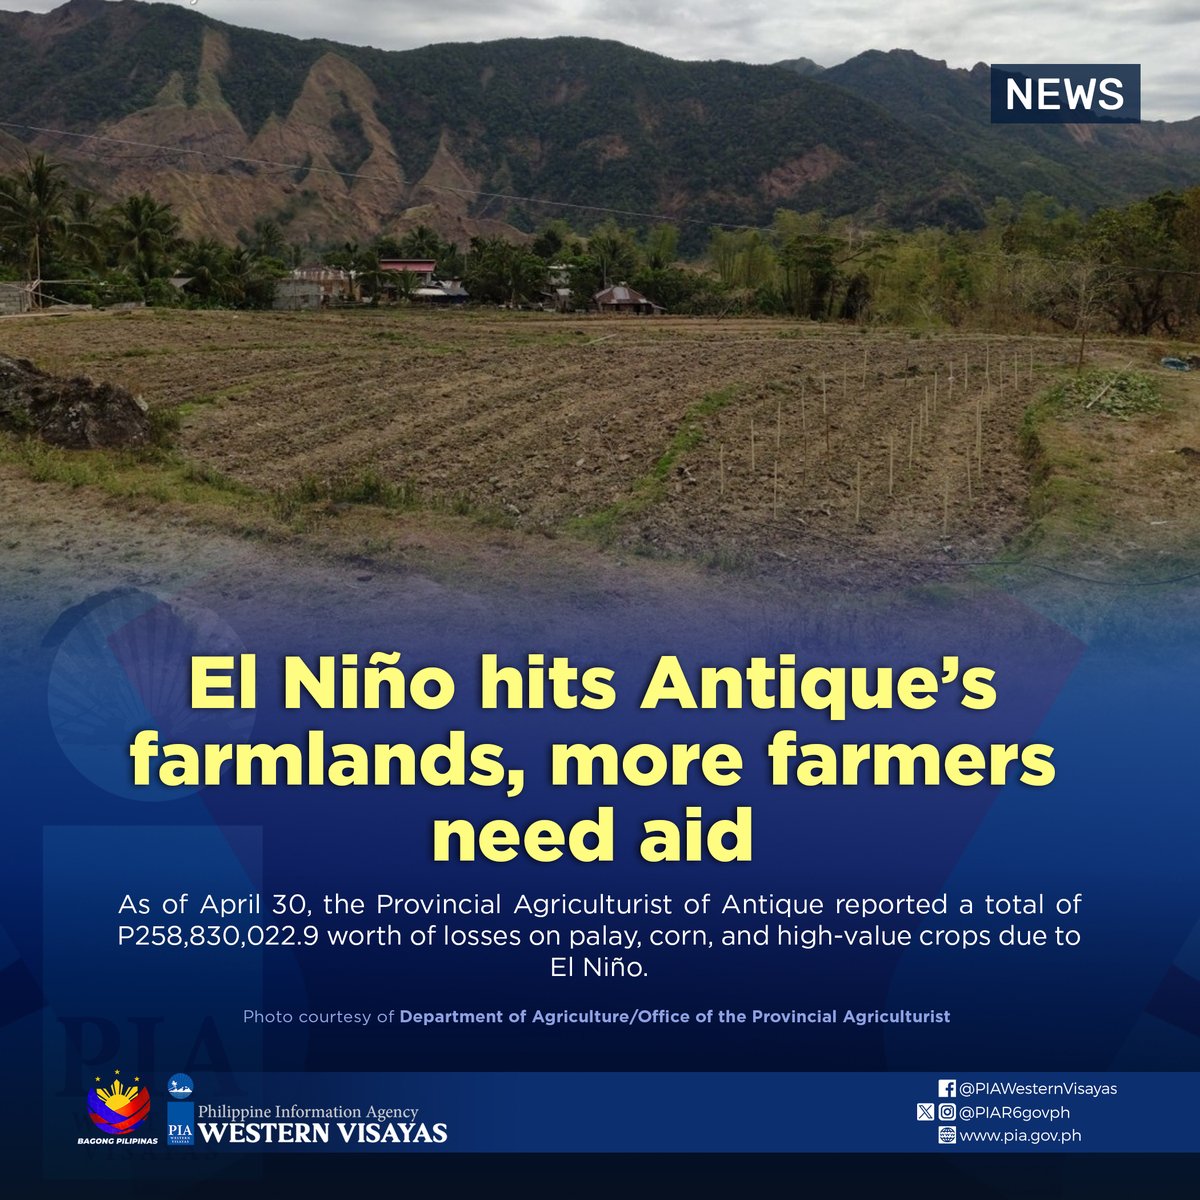 With the declaration of the Province of Antique under a state of calamity due to the effects of the El Niño phenomenon, farm losses have increased with more farmers needing assistance.

More details: pia.gov.ph/news/2024/05/1…

#BagongPilipinas
#PIAWesternVisayas
#GetInformed